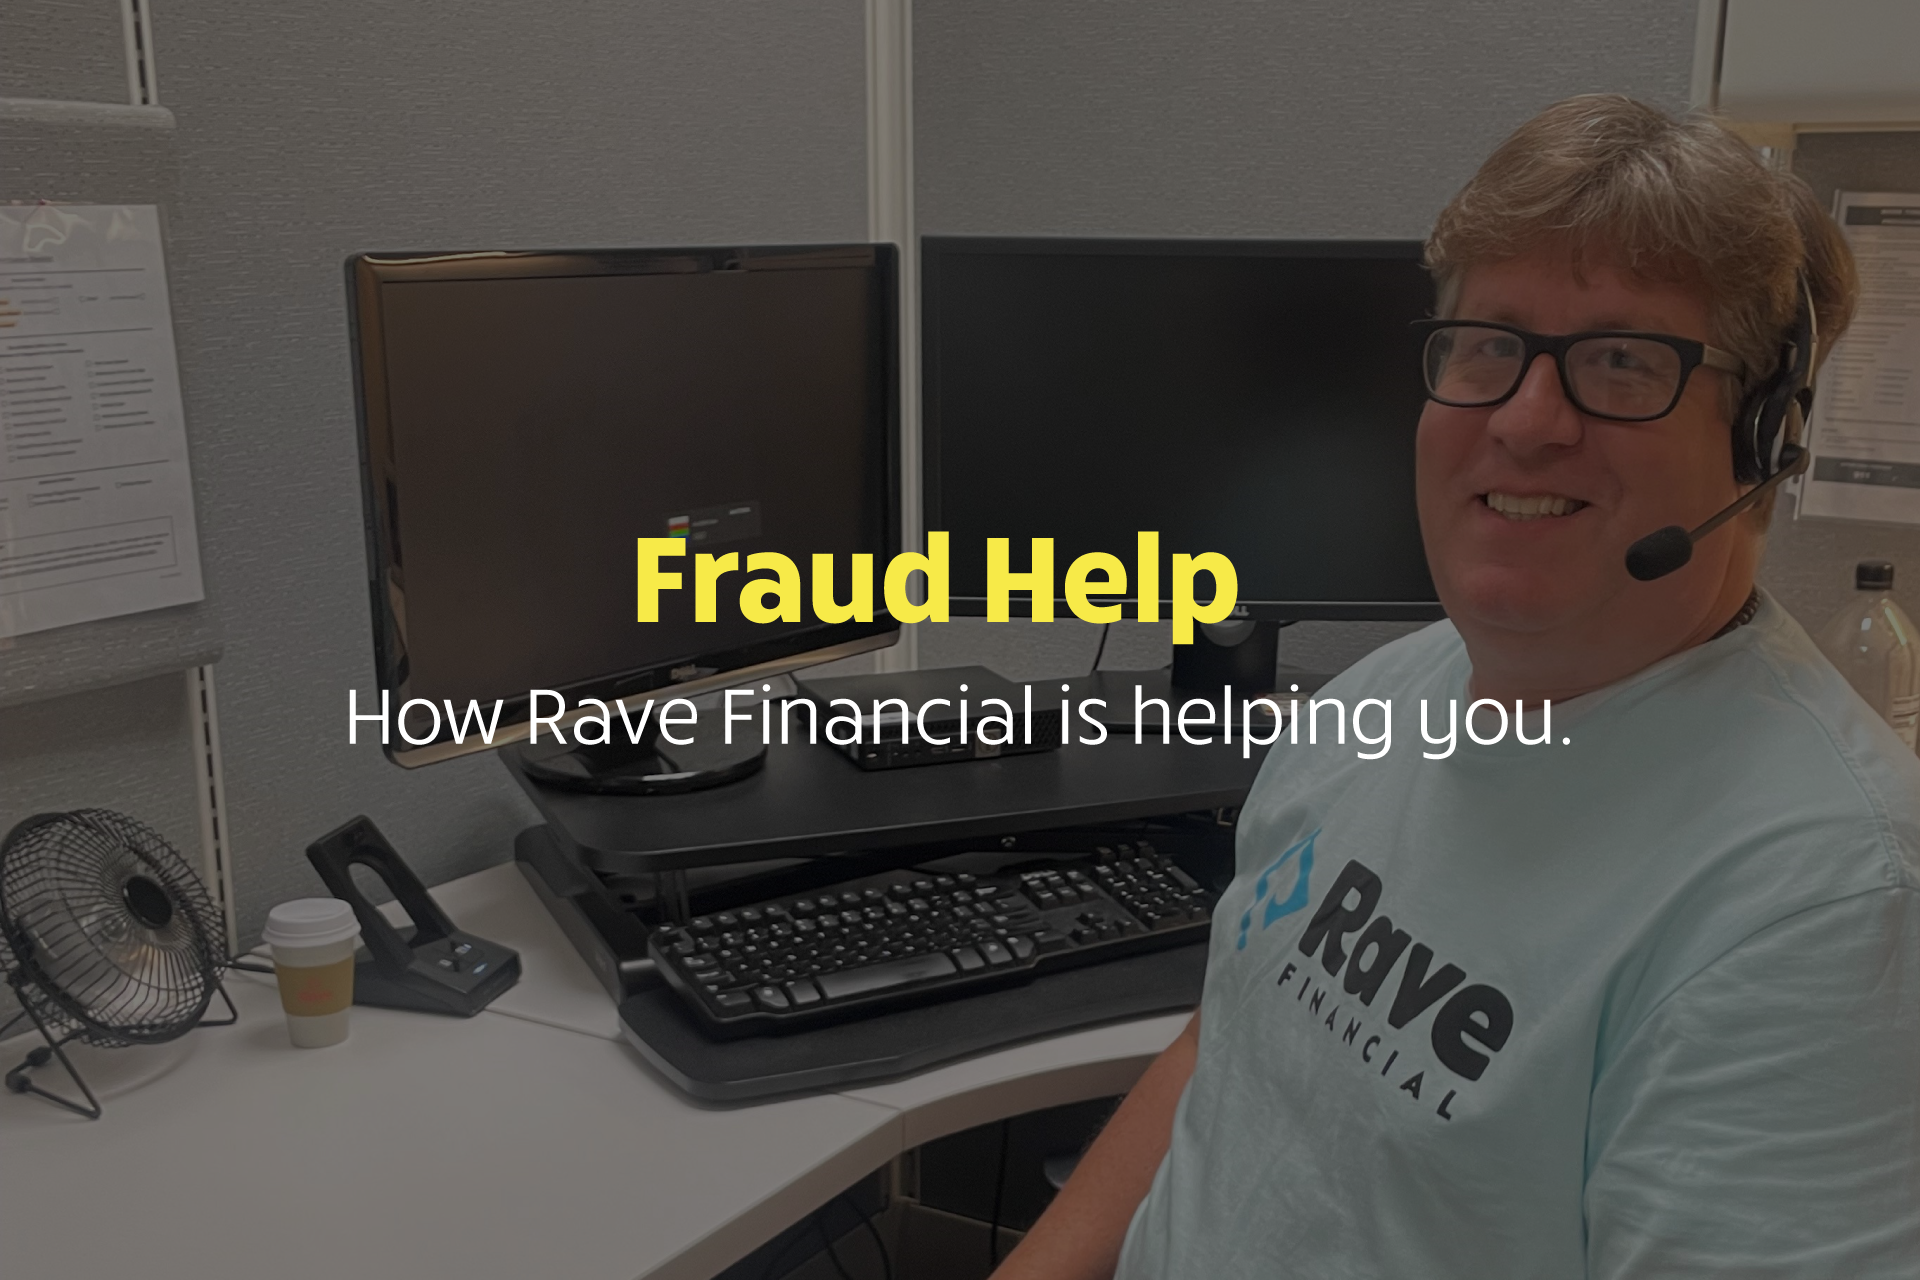 Fraud Help - How Rave Financial is helping you.